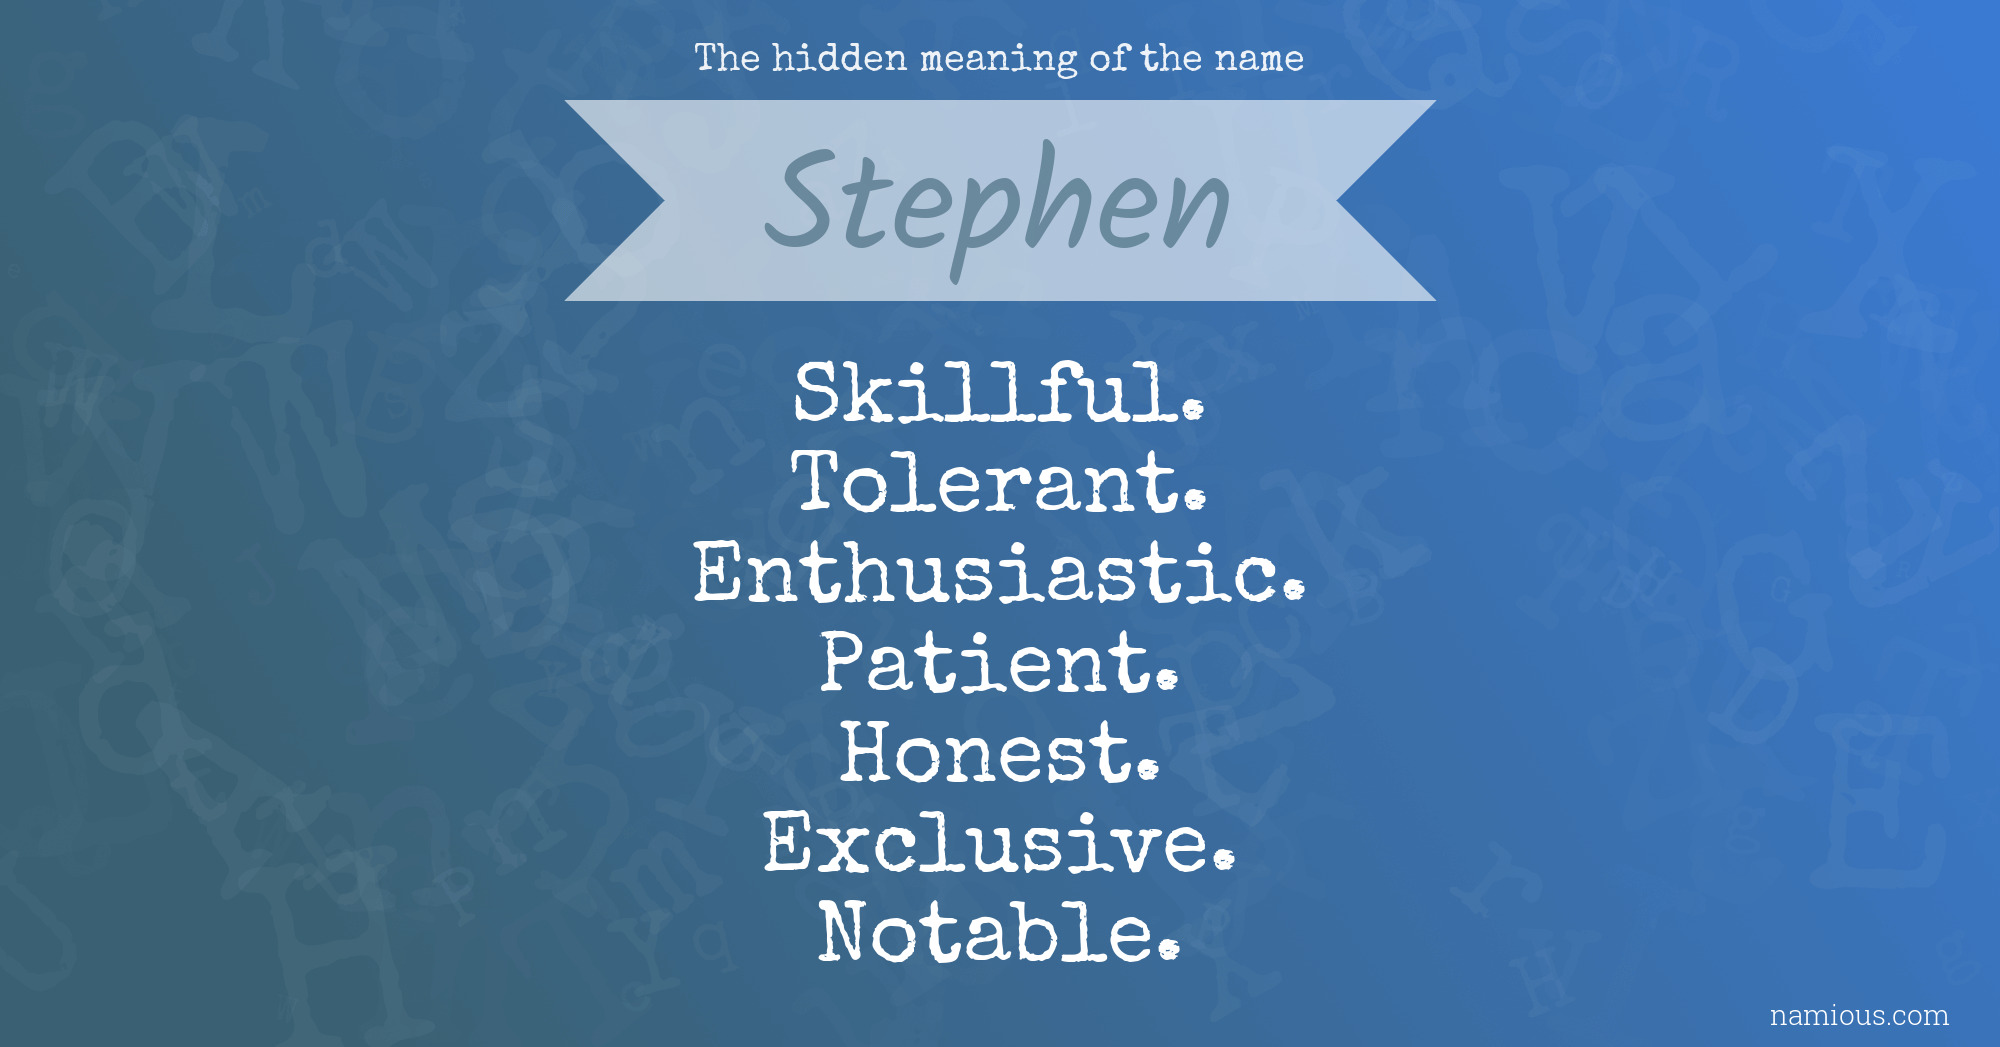 The hidden meaning of the name Stephen